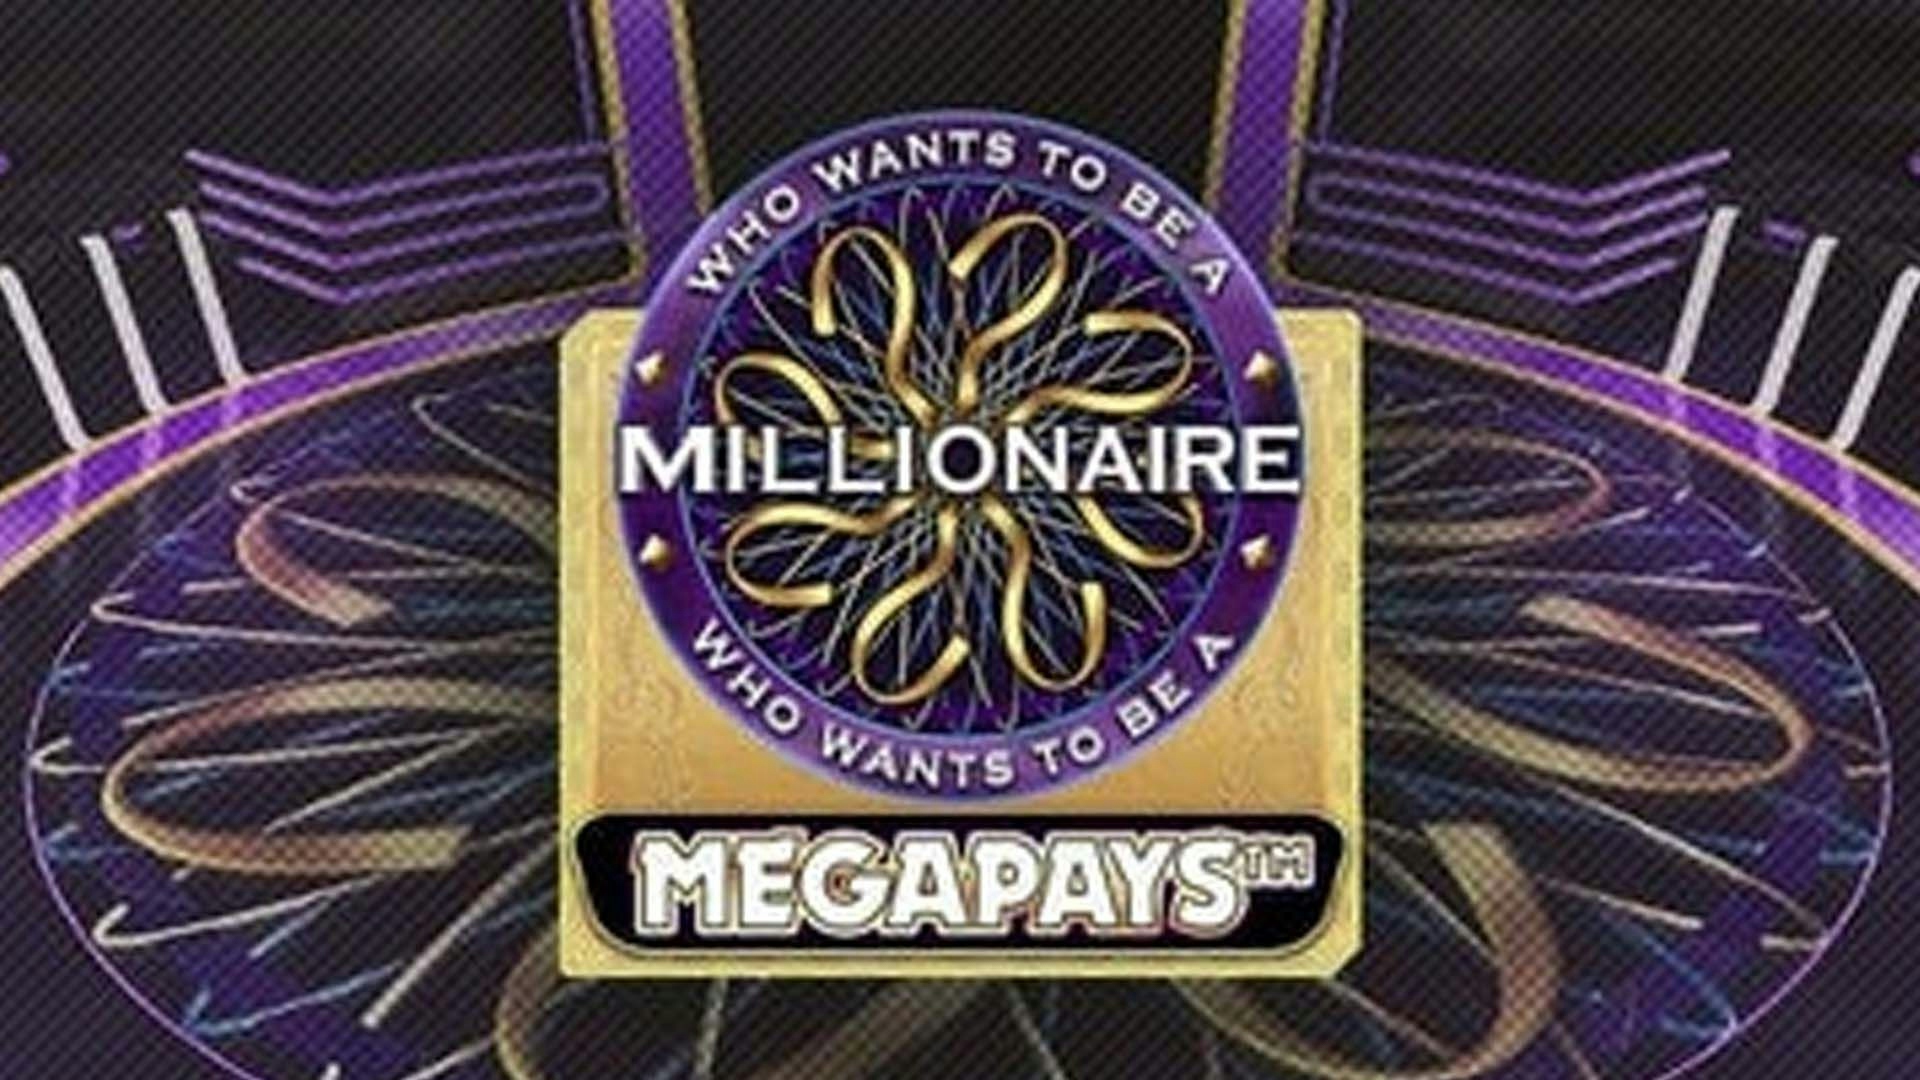 WHO WANTS TO BE A MILLIONAIRE MEGAPAYS